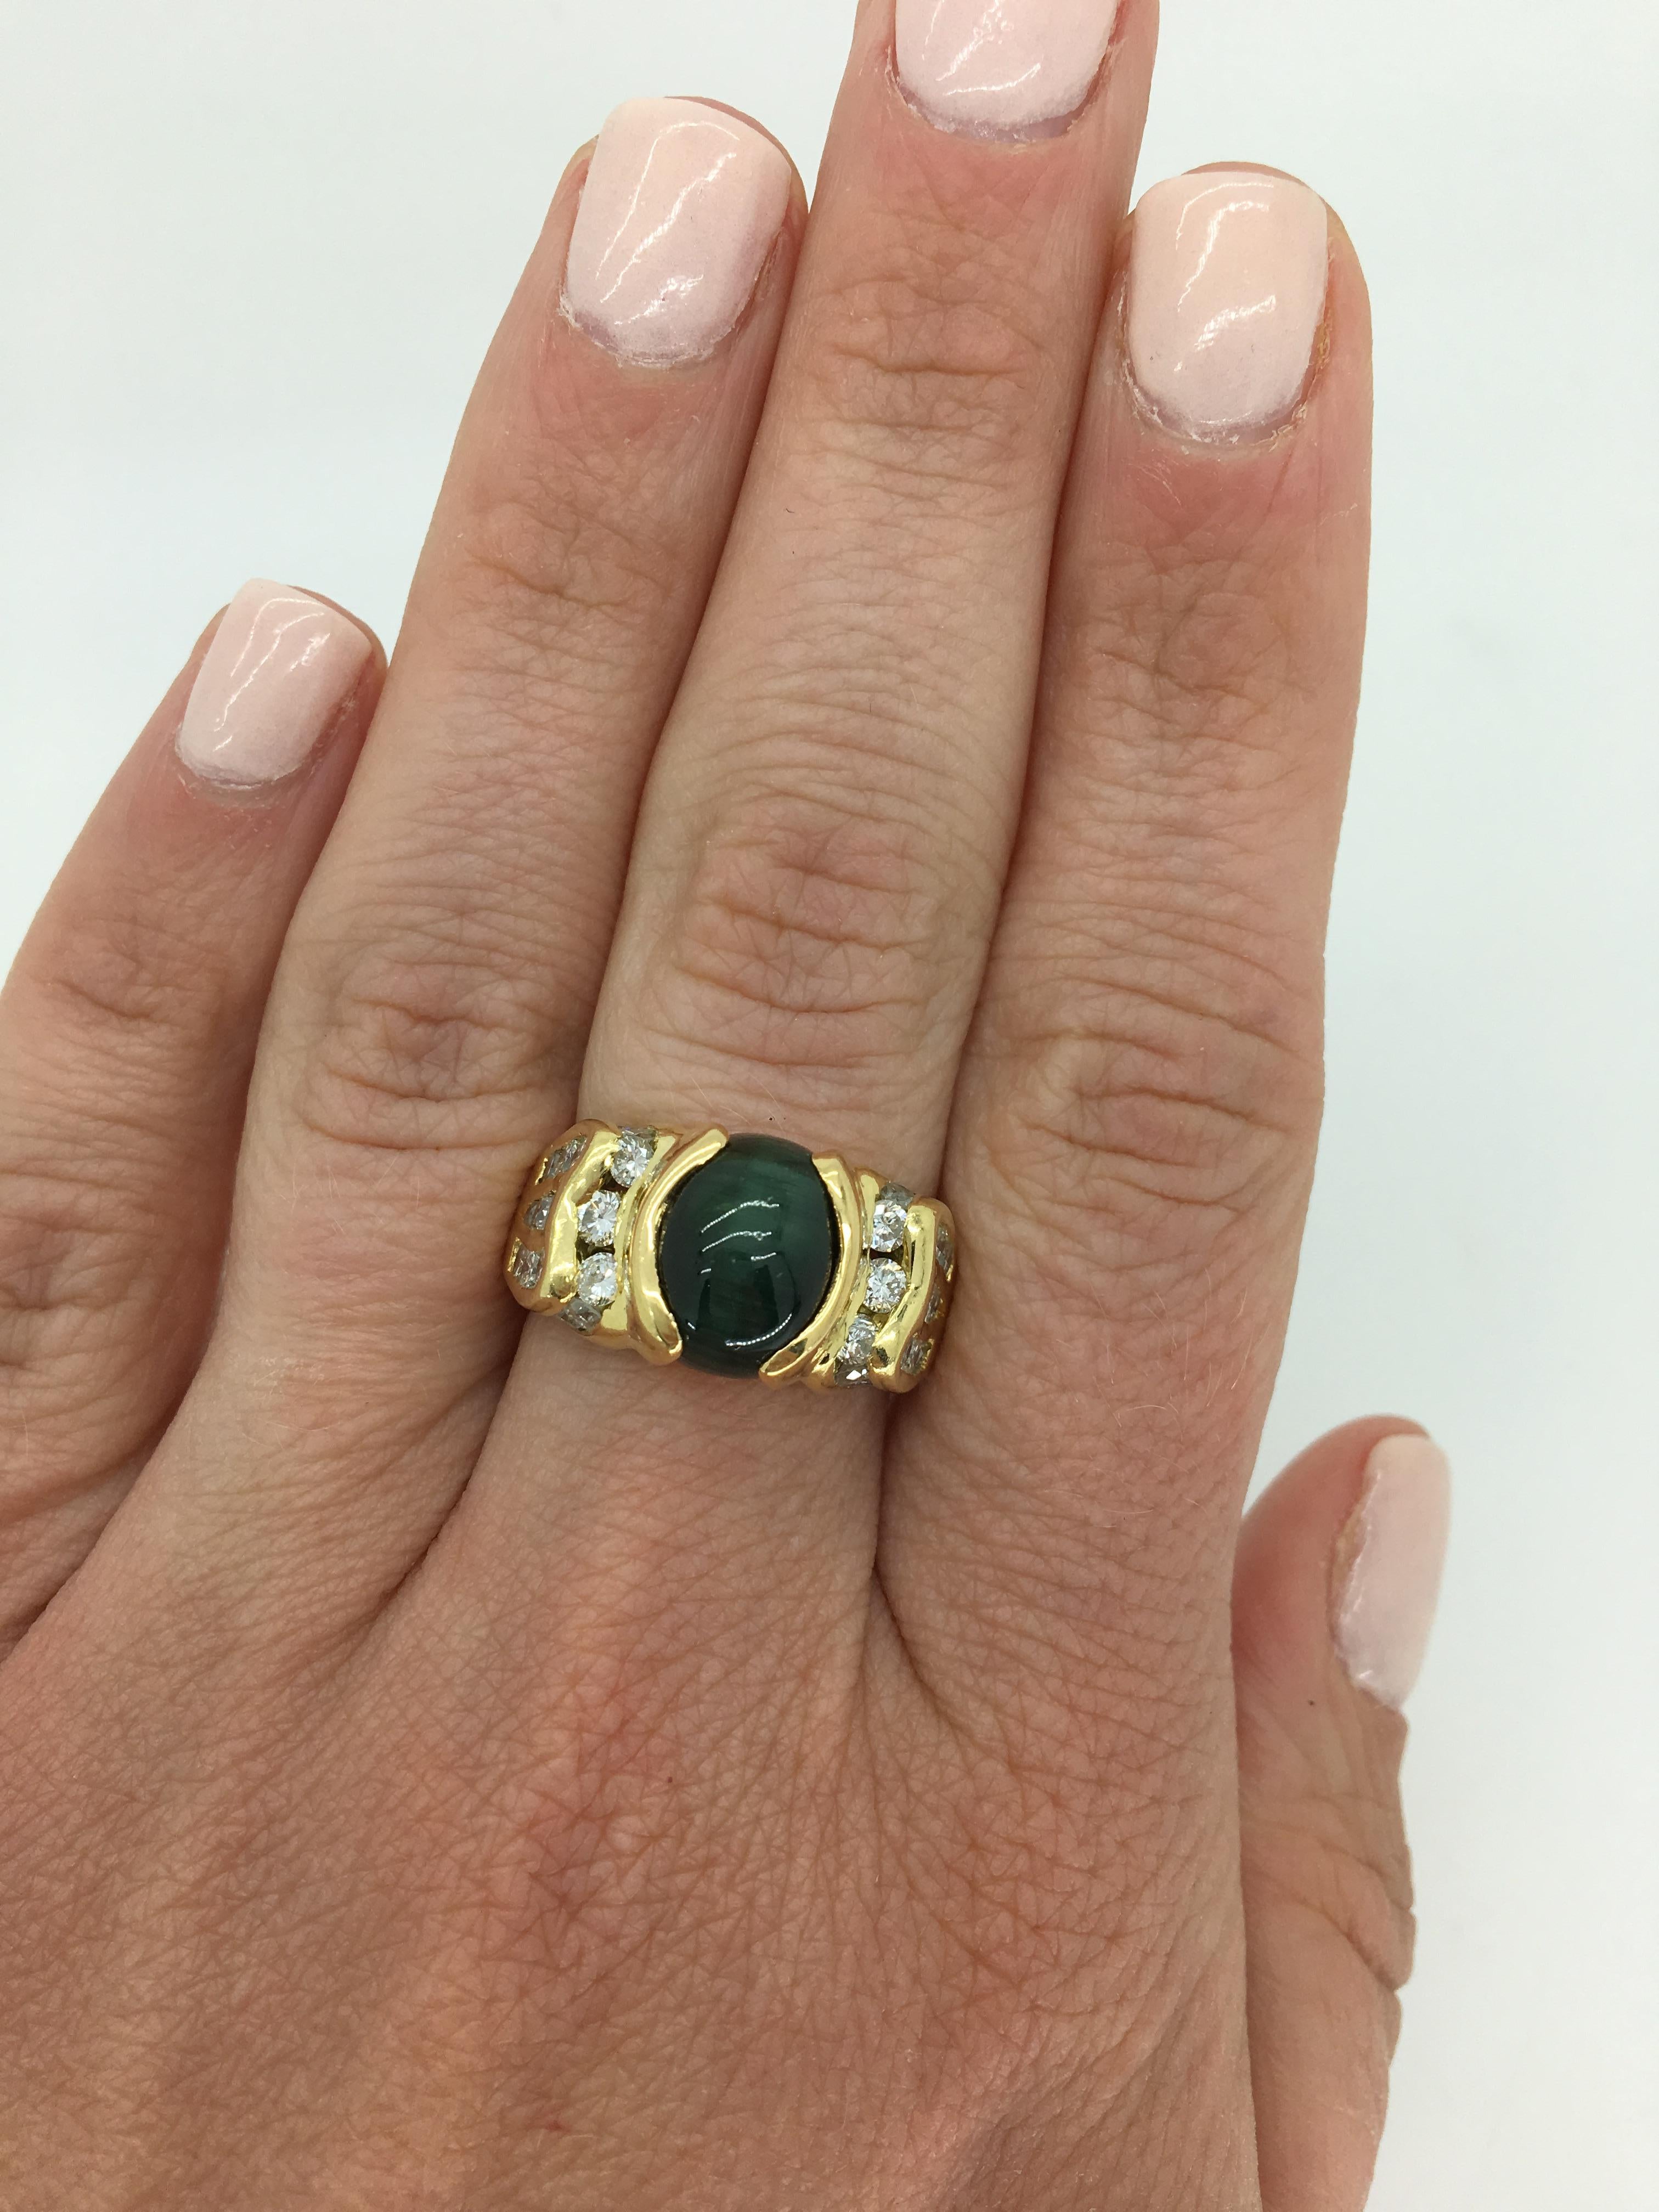 Cabochon cut Tigers Eye cocktail ring with approximately 2.00 carats of accenting diamonds crafted in 18k yellow gold.

Gemstone: Green Tigers Eye & Diamond
Gemstone Carat Weight: Approximately 11x8mm Oval Cabochon Cut
Diamond Carat Weight: